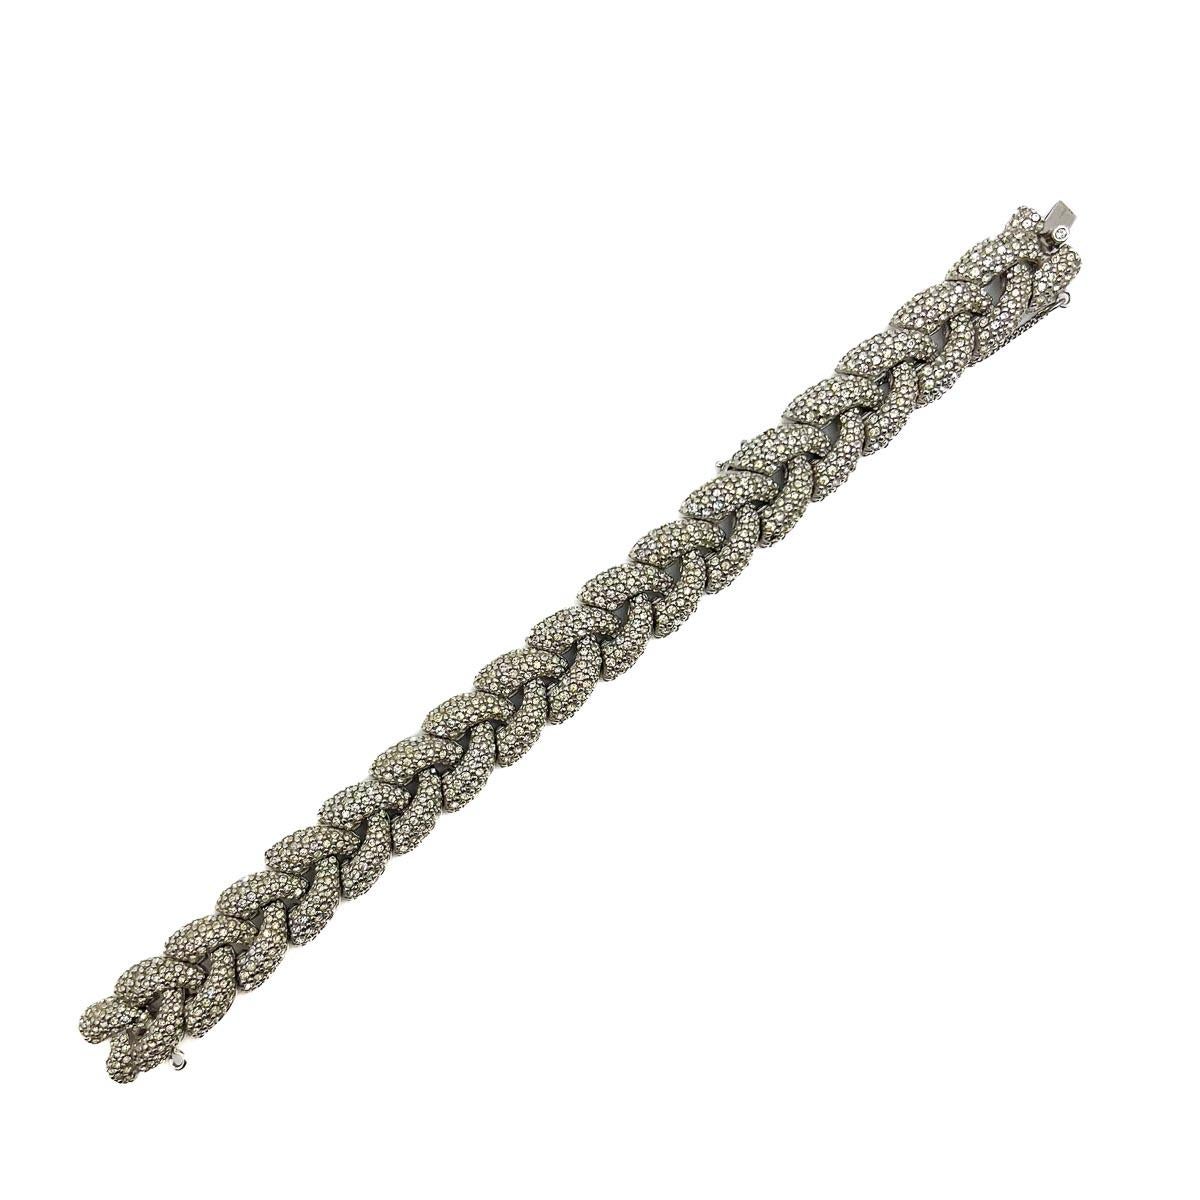 A Vintage Ciner Paste Plait Bracelet. A glorious take on the eternally chic Art Deco jewels by one of America's finest costume jewellery makers. Incredible quality, incredible style, eternally chic. A jewel box superstar that will give the look of